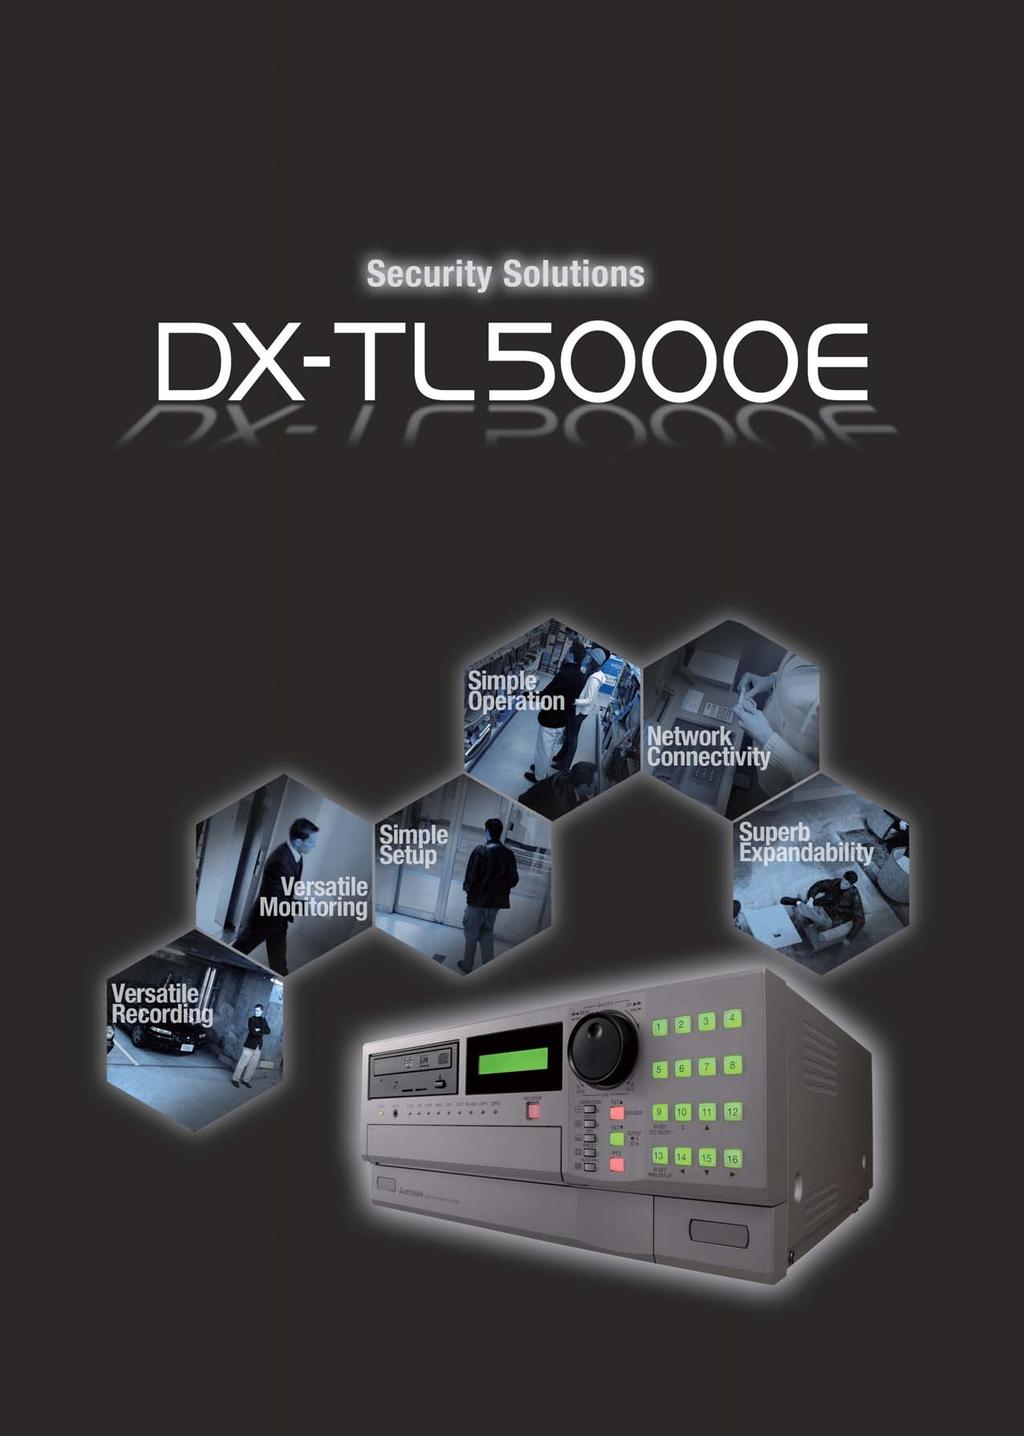 16ch DIGITAL RECORDER ISO9001 JQA-0521 051 To meet the increasing demand for professional-grade digital video surveillance systems, Mitsubishi Electric has developed the DX-TL5000E Digital Recorder.